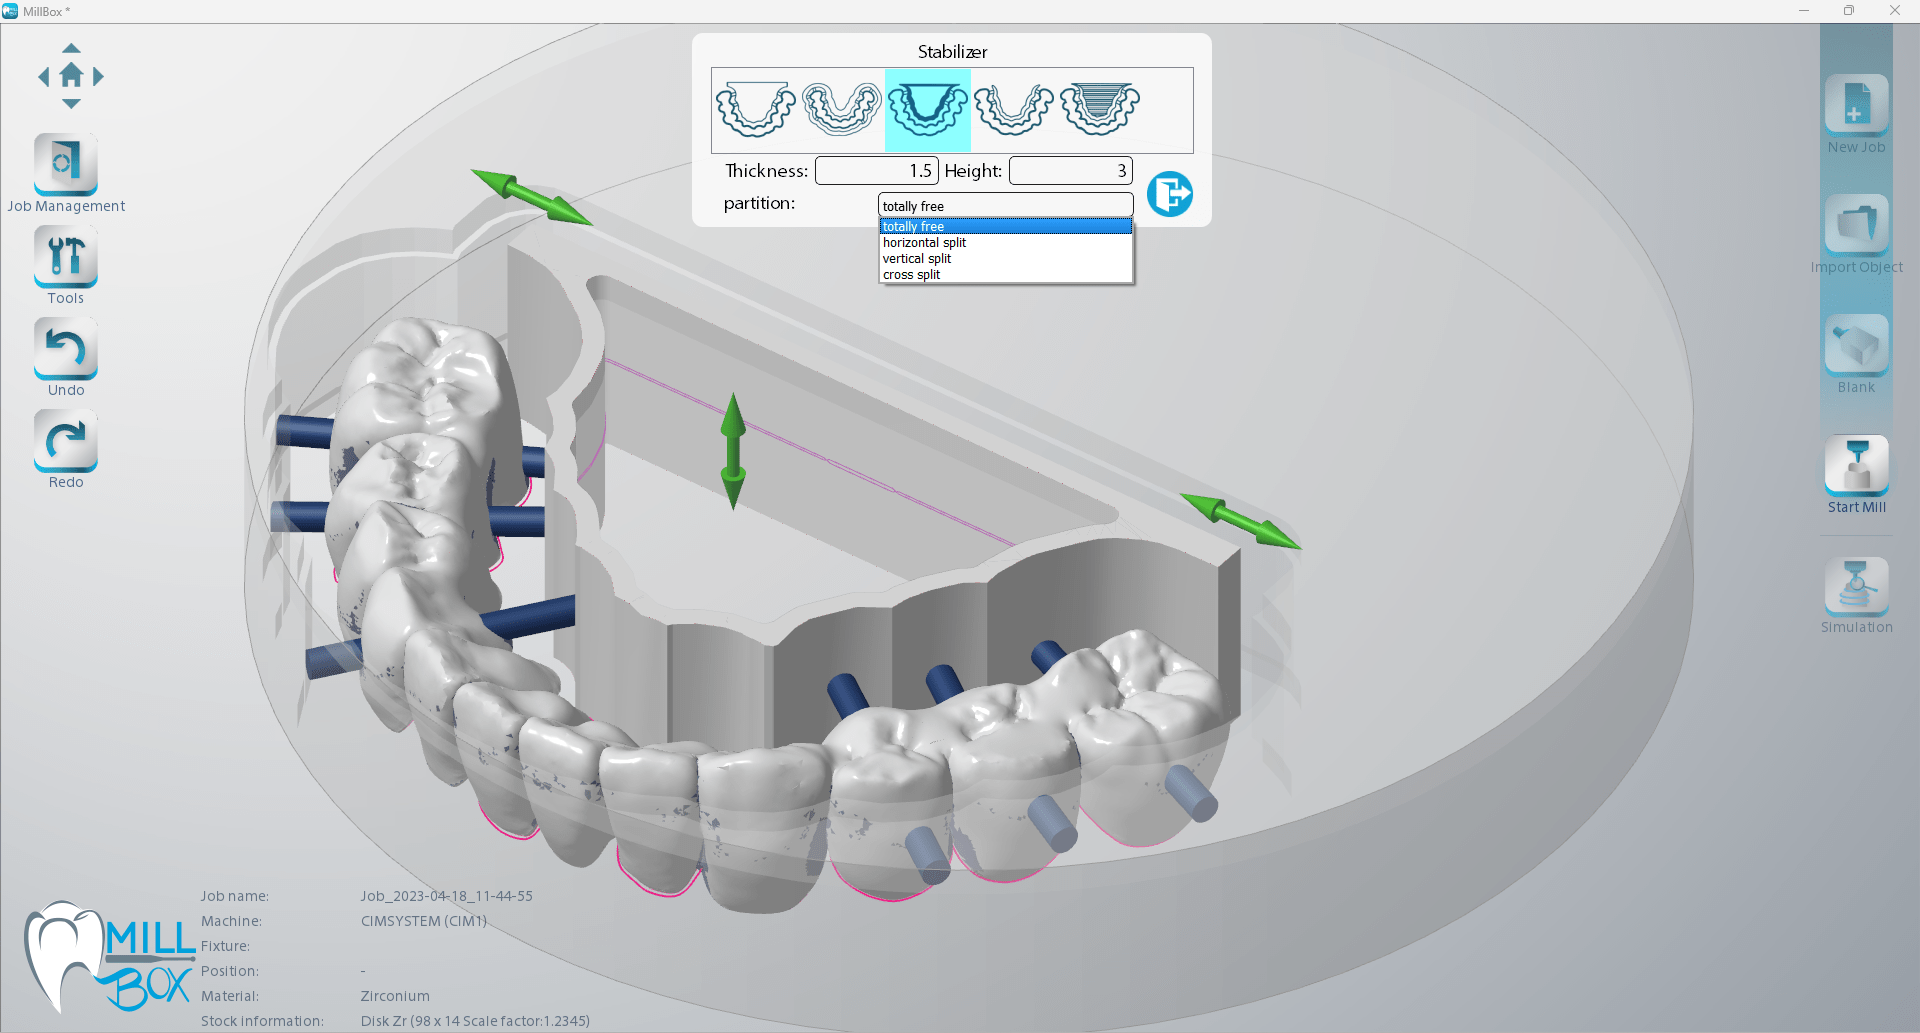 Image shows printscreen of connectors-stabilizers module within MillBox dental software